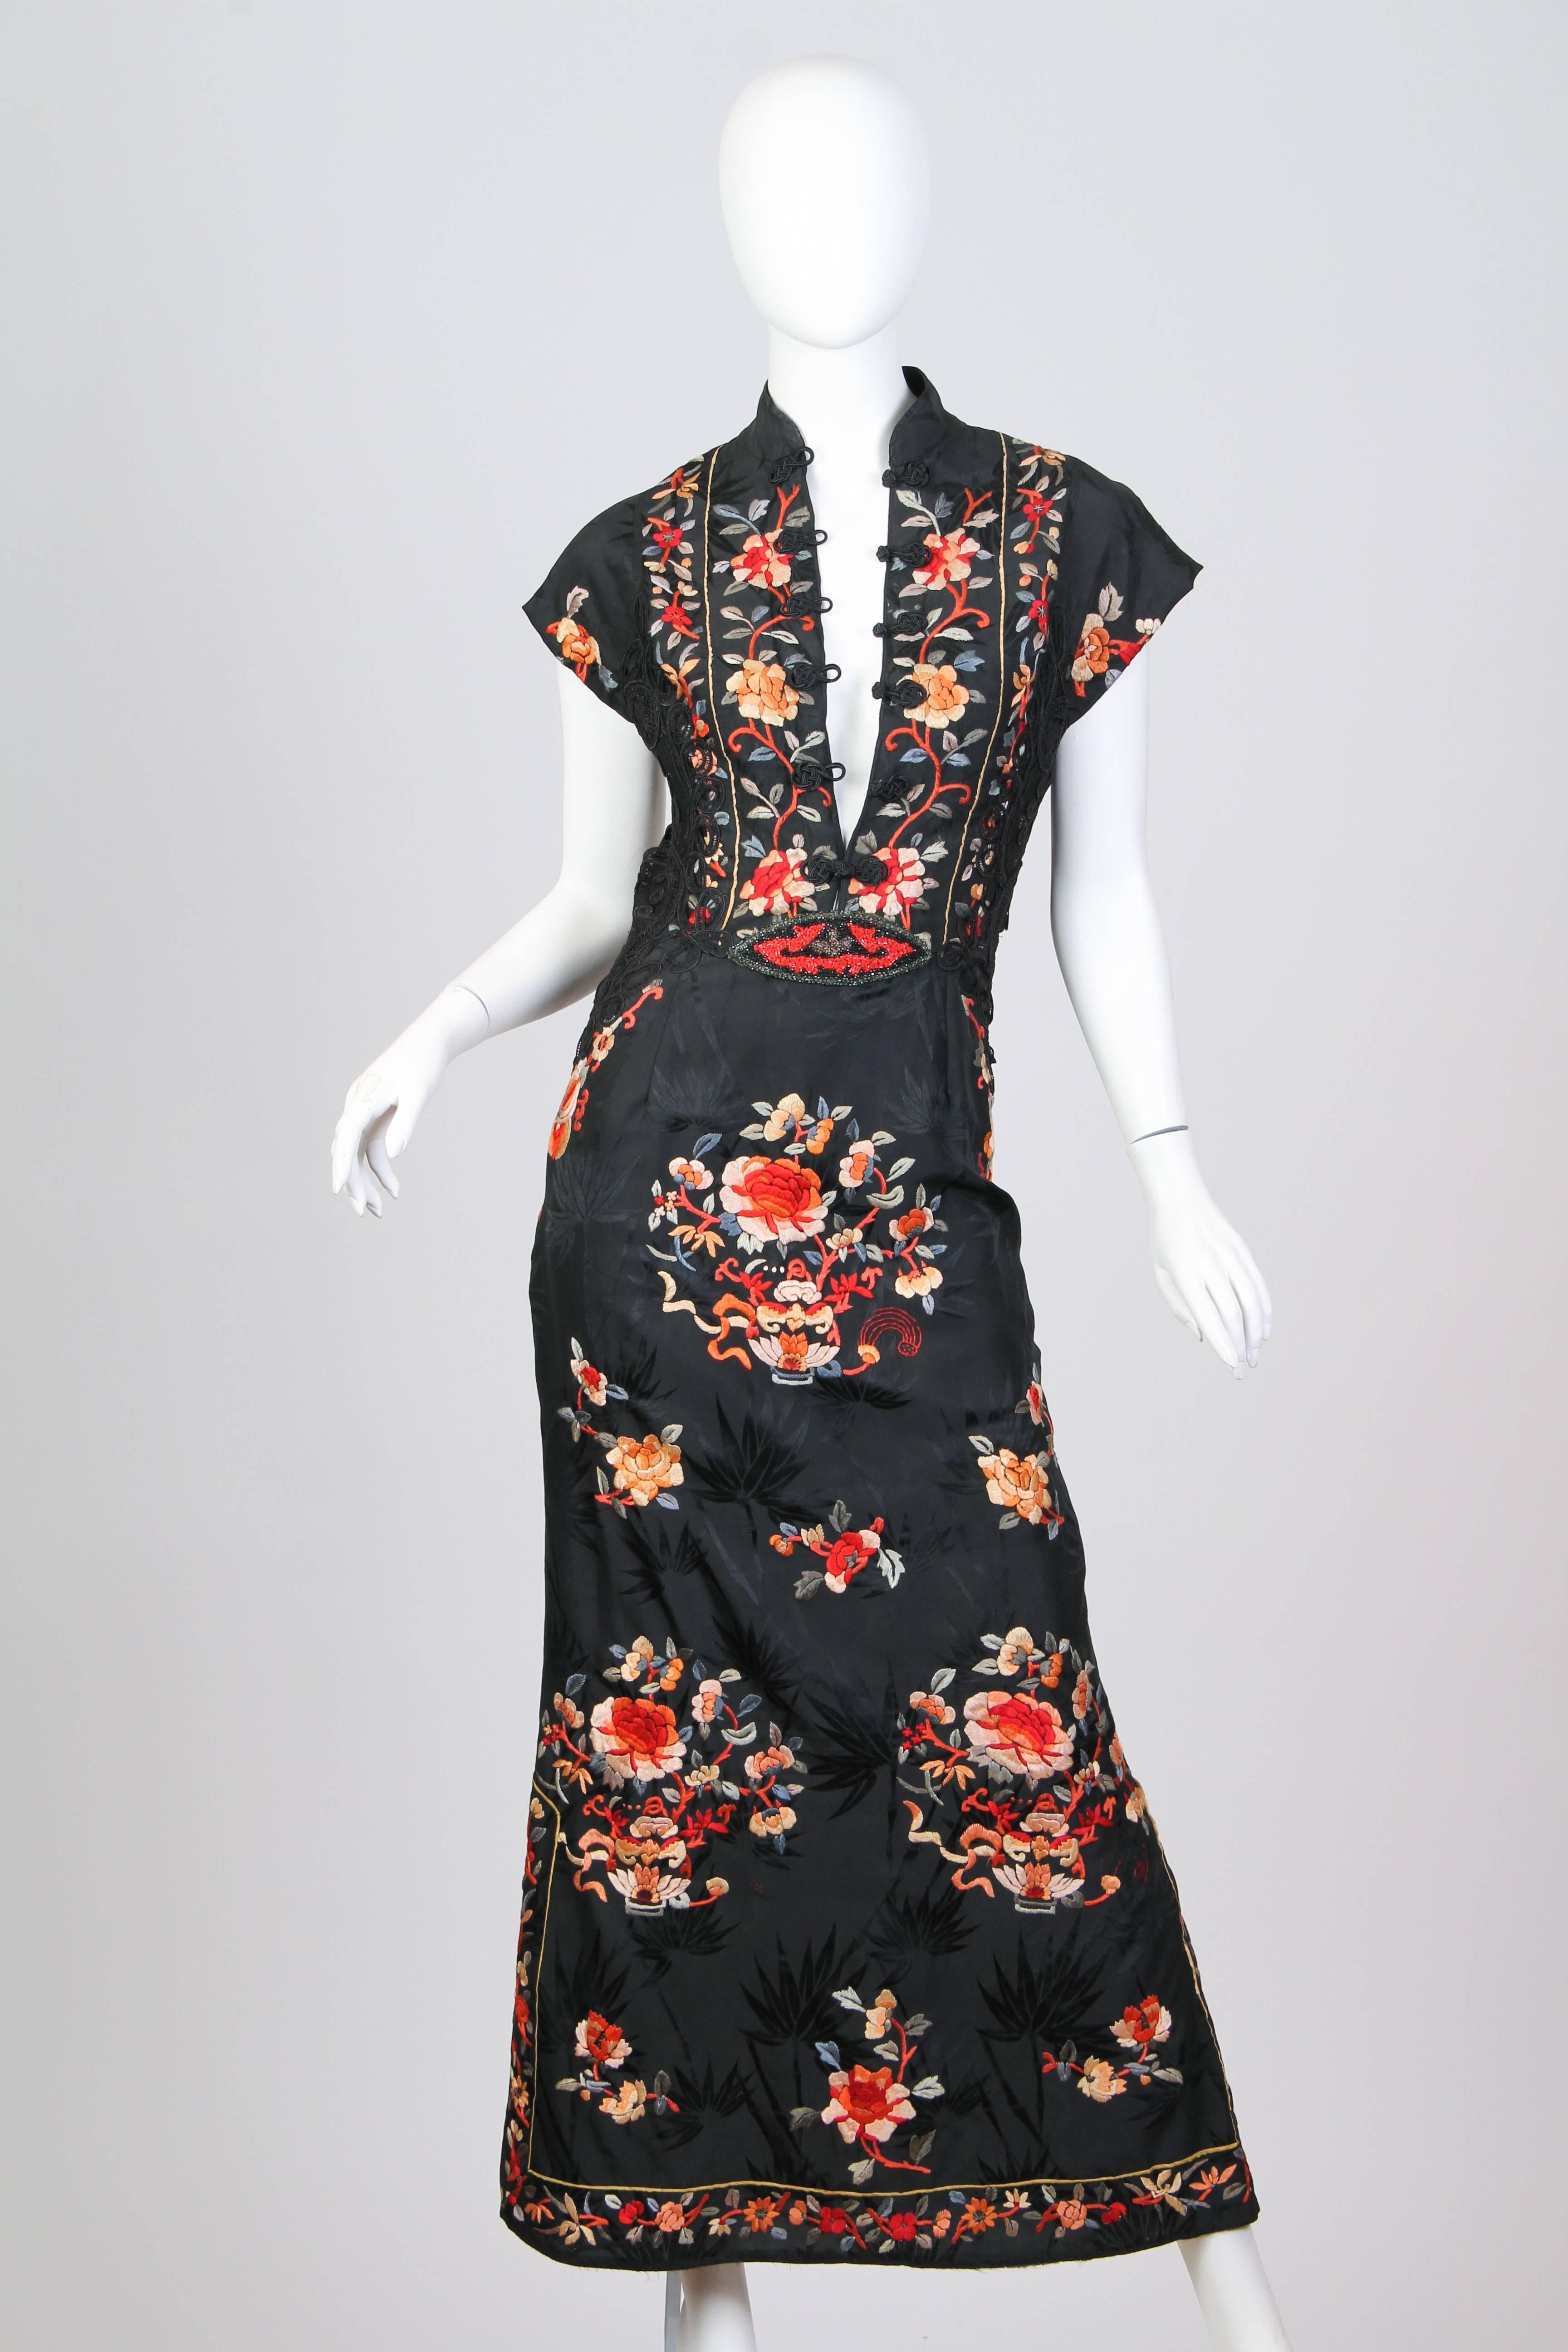 This is an updated Chinese Cheongsam or Quipao dress, inspired by traditional designs. Made from a set of antique 1930s silk pajamas with incredible floral hand embroidery. The dress is accented with 1920s beading, Victorian handmade lace, and